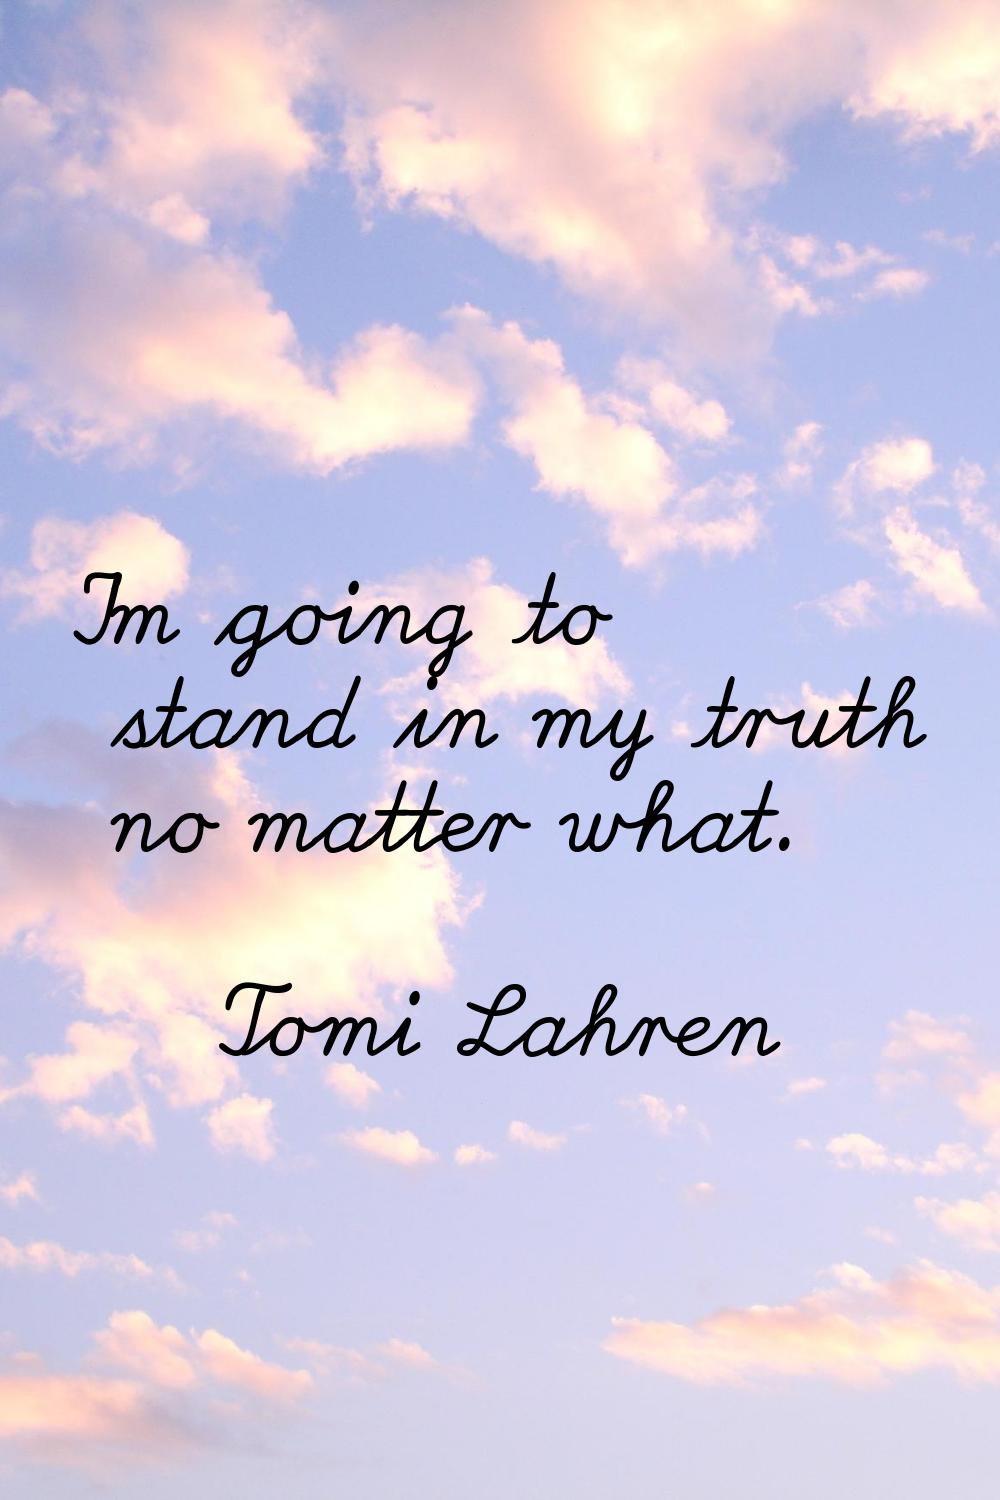 I'm going to stand in my truth no matter what.